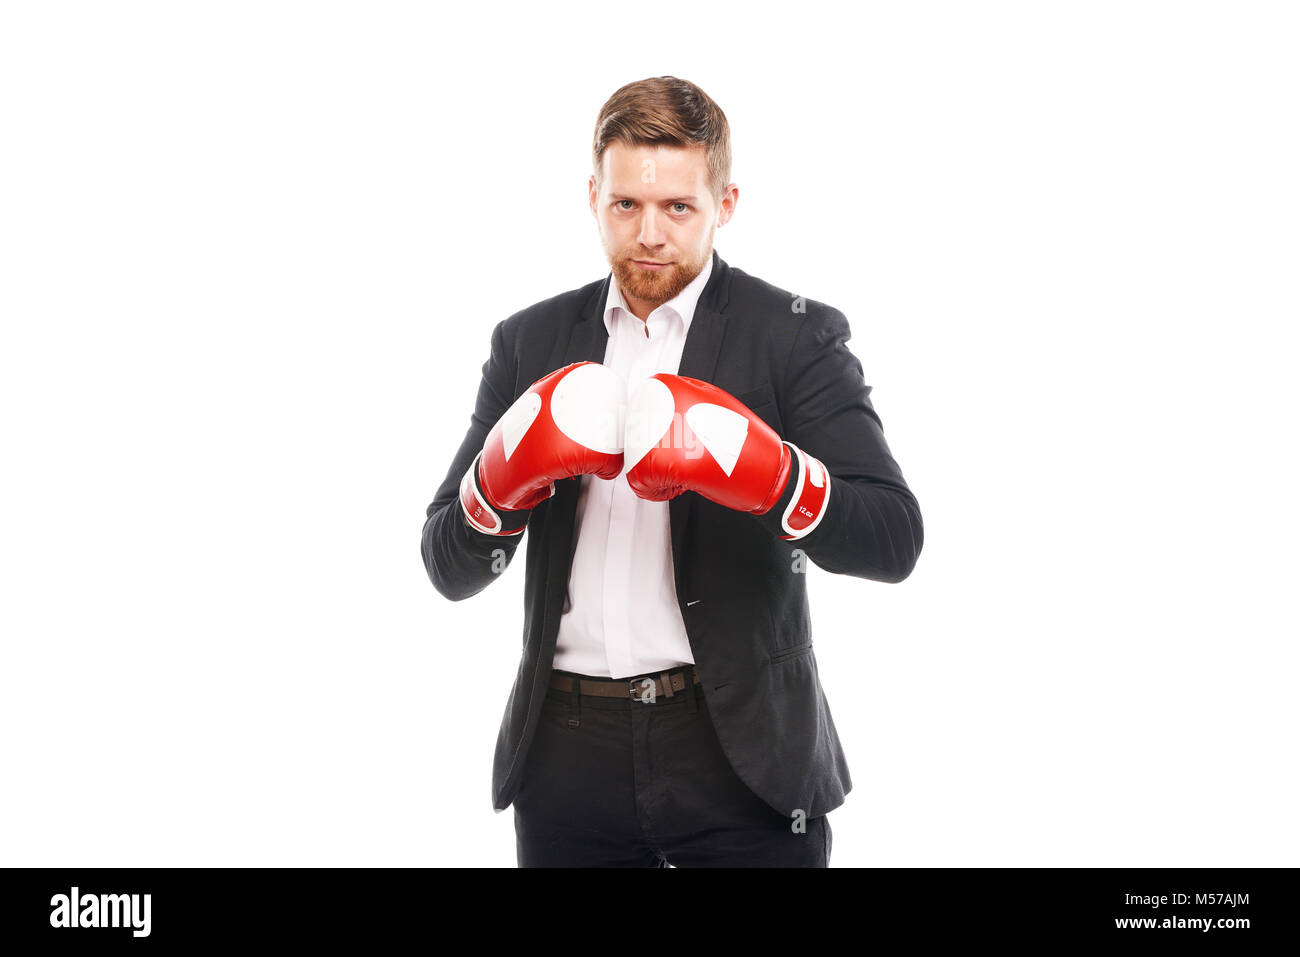 Businessman in boxing gloves Stock Photo